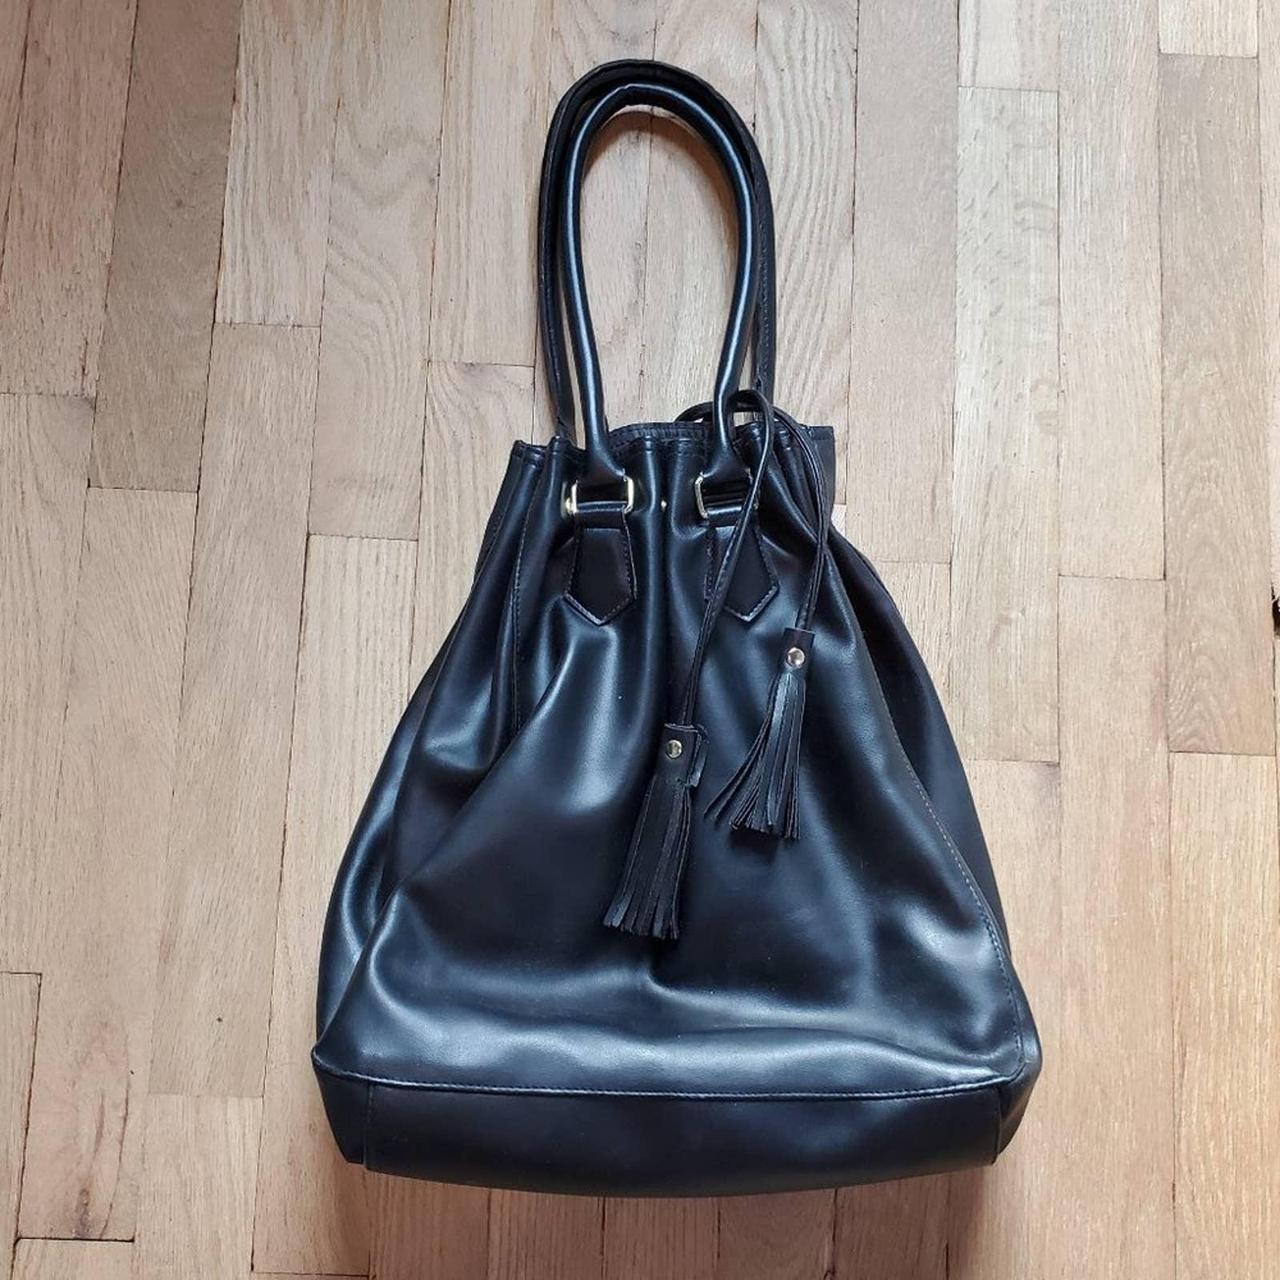 American Vintage Women's Going Out Bag - Black